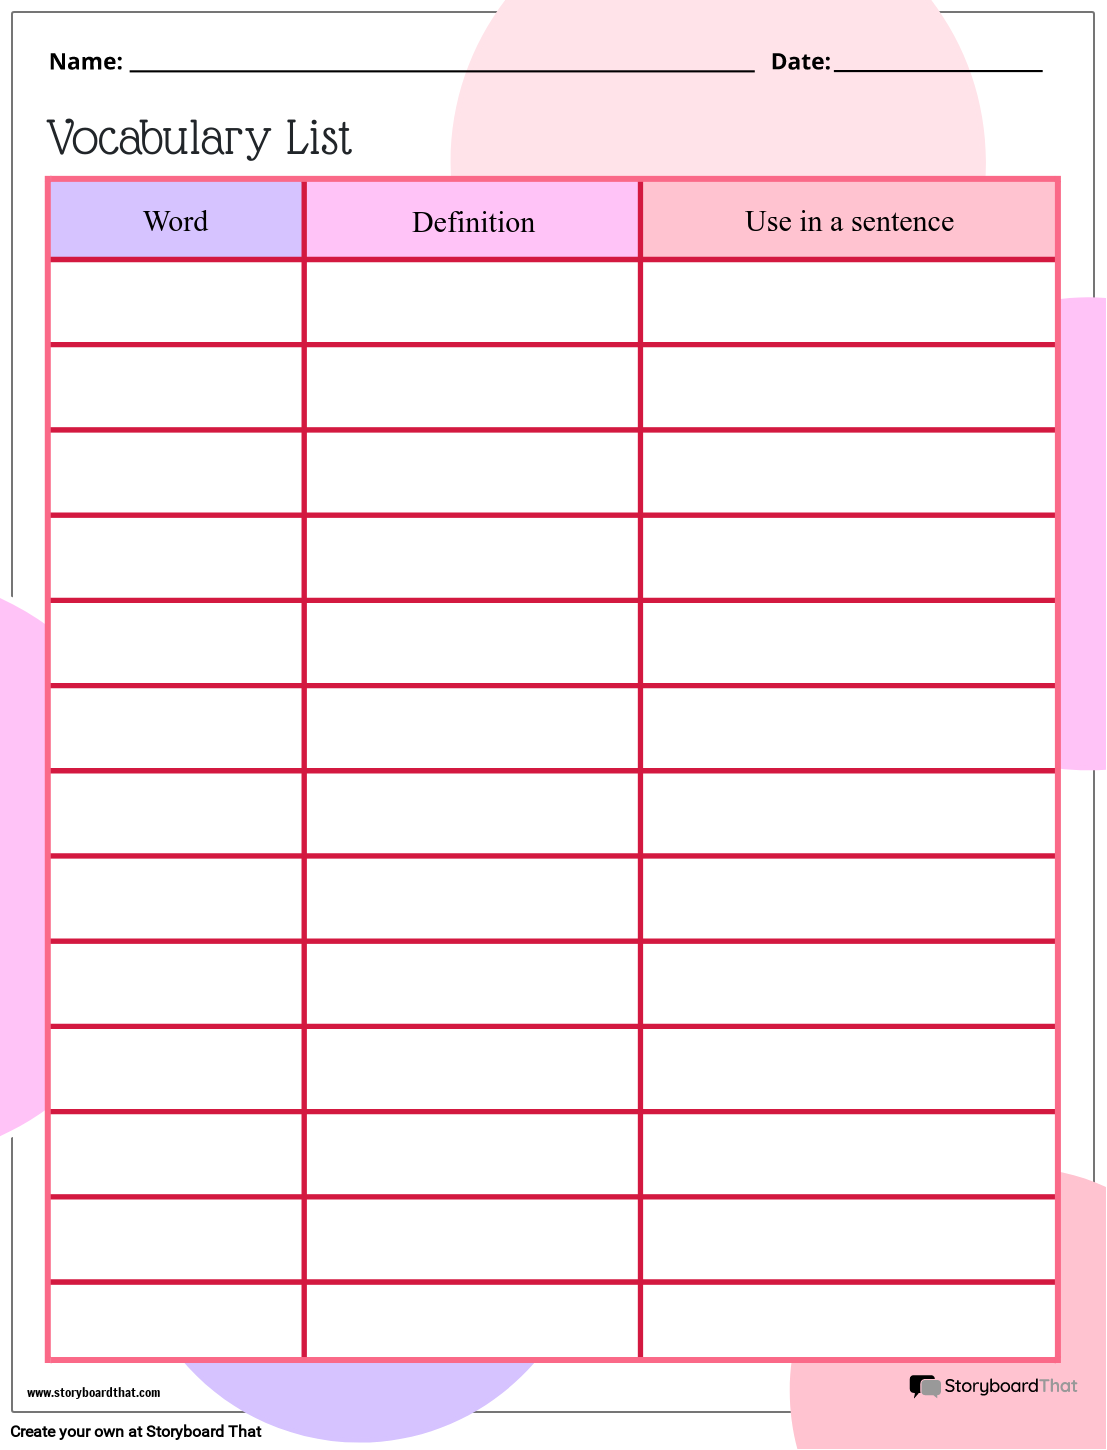 new-create-page-vocabulary-template-2-storyboard